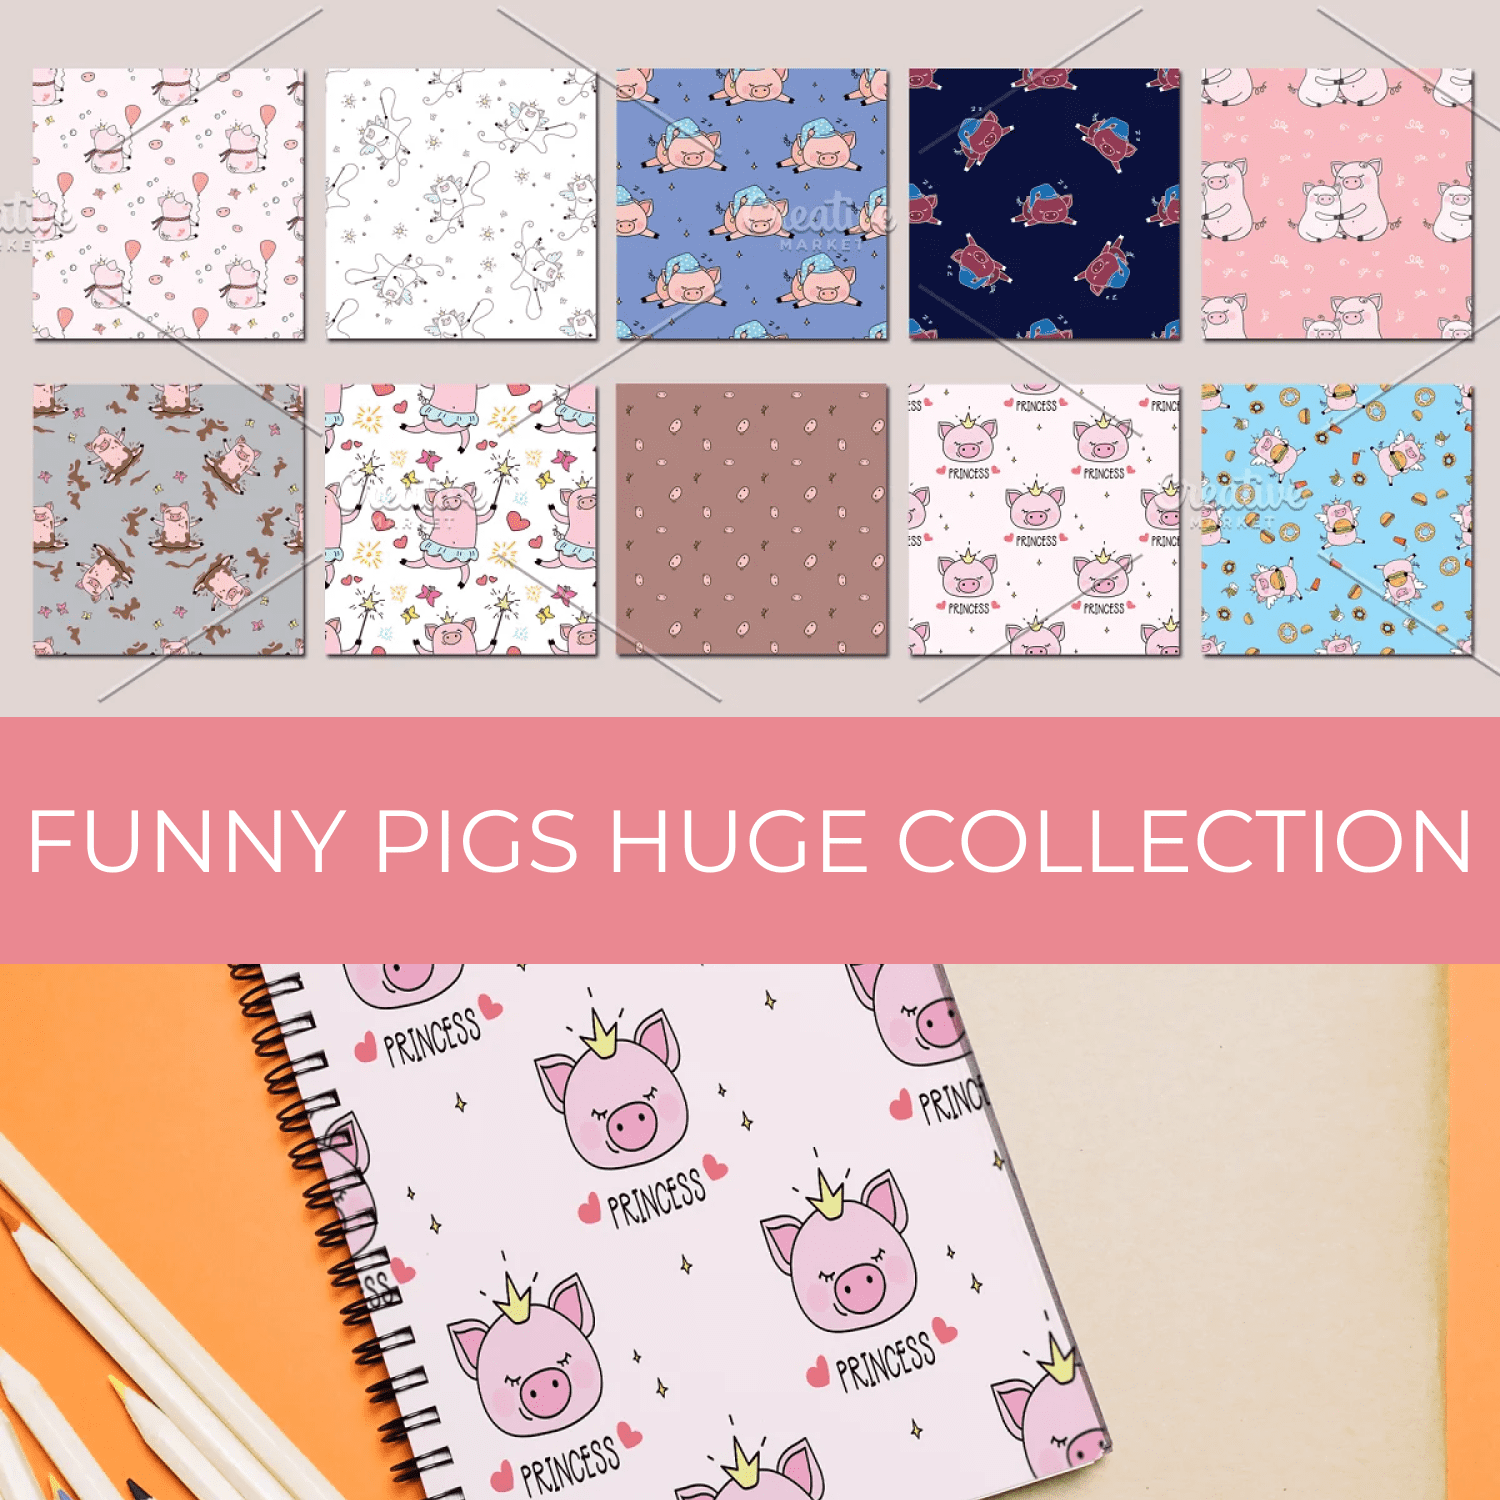 Funny pigs huge collection cover.